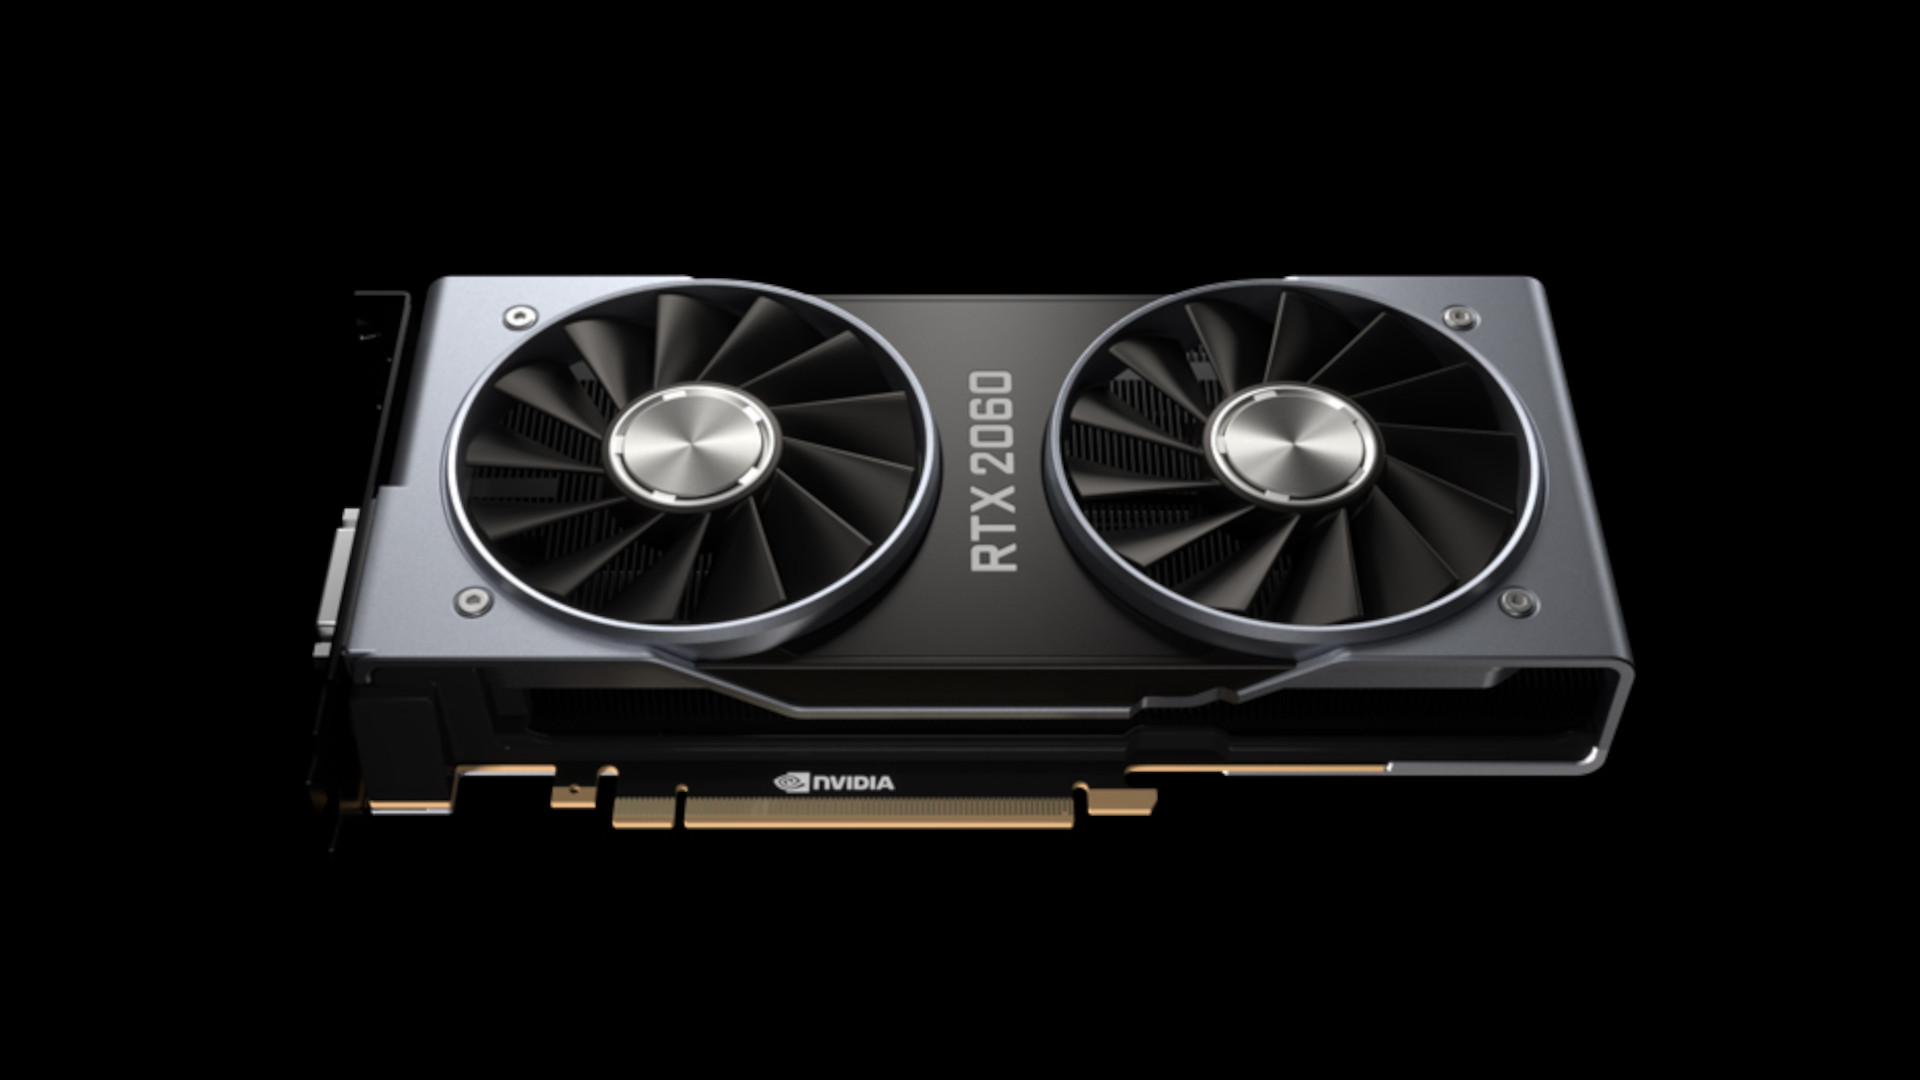 Retailers can't list the RTX 2060 12GB, let alone sell it, because of insufficient stock